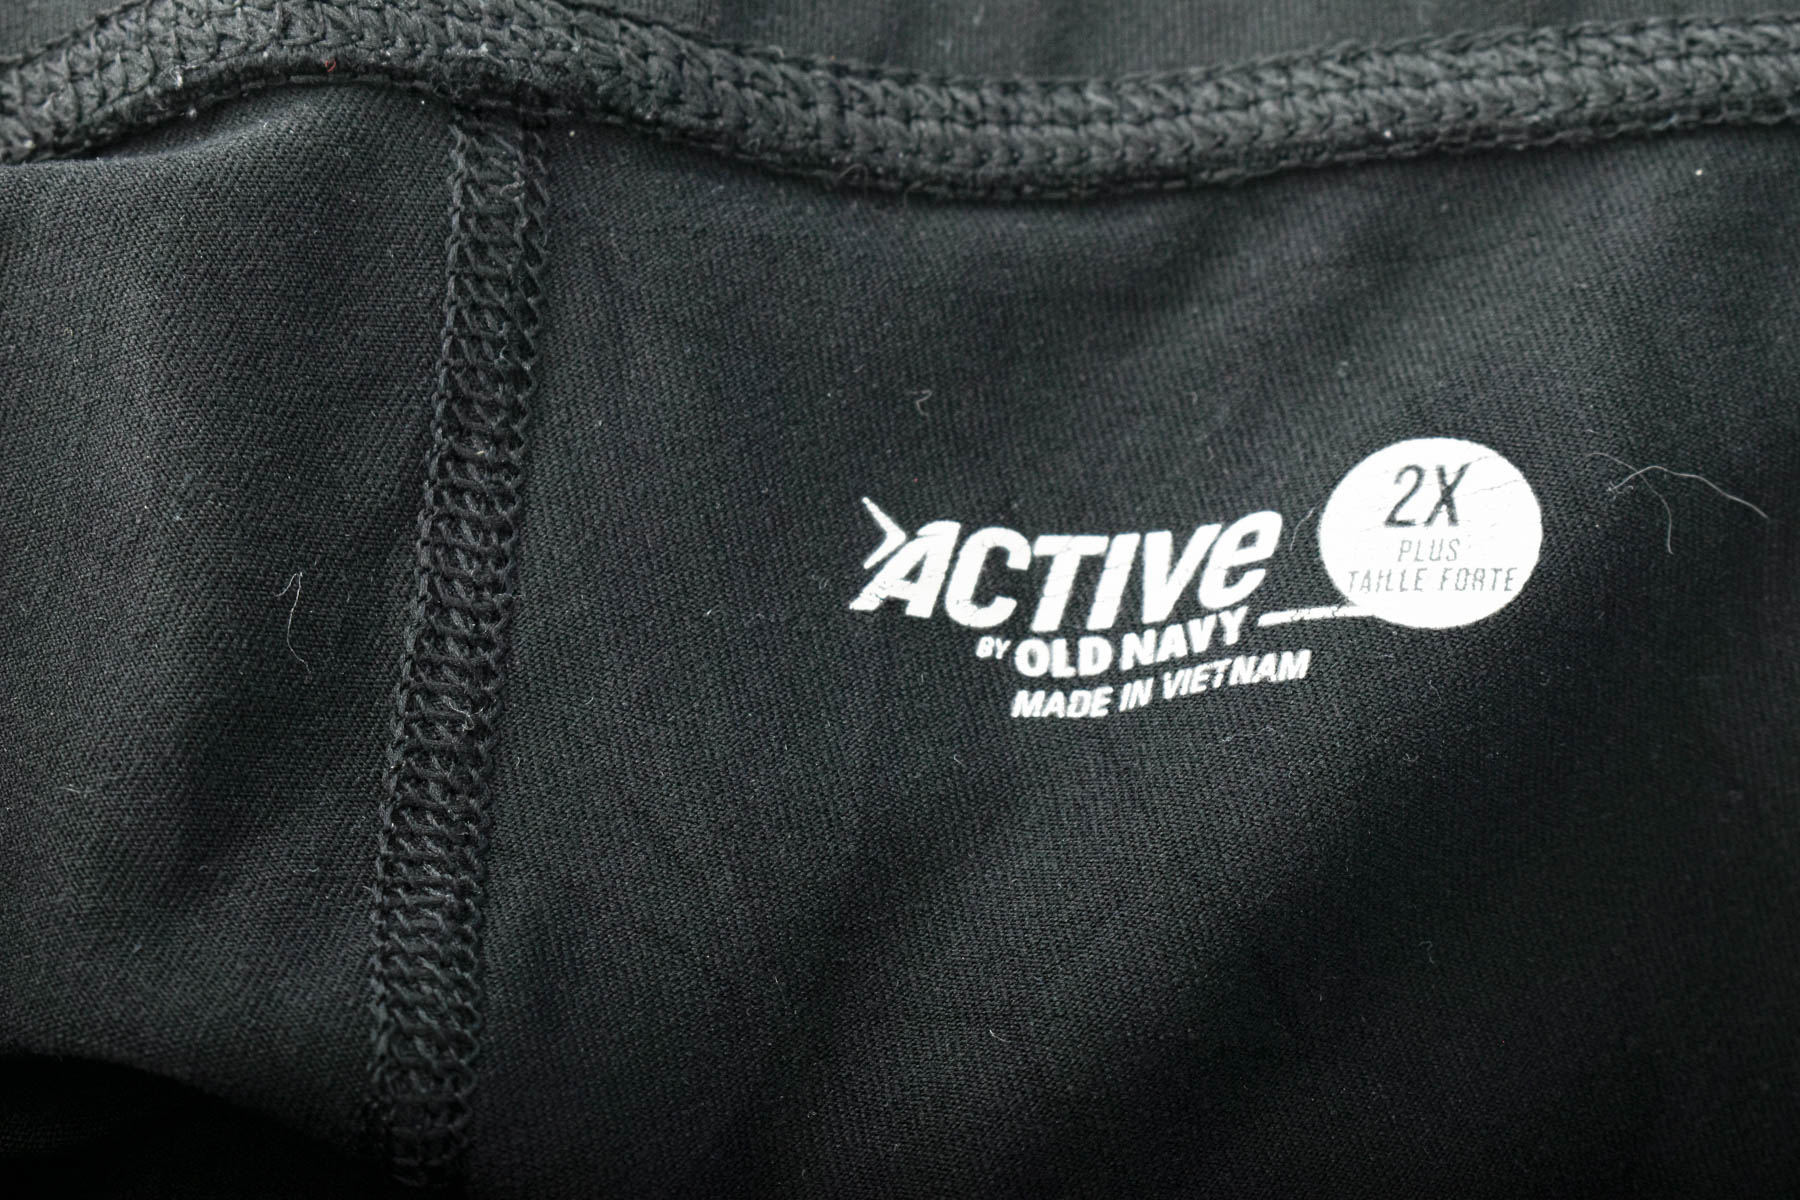 Дамски клин - ACTIVE BY OLD NAVY - 2